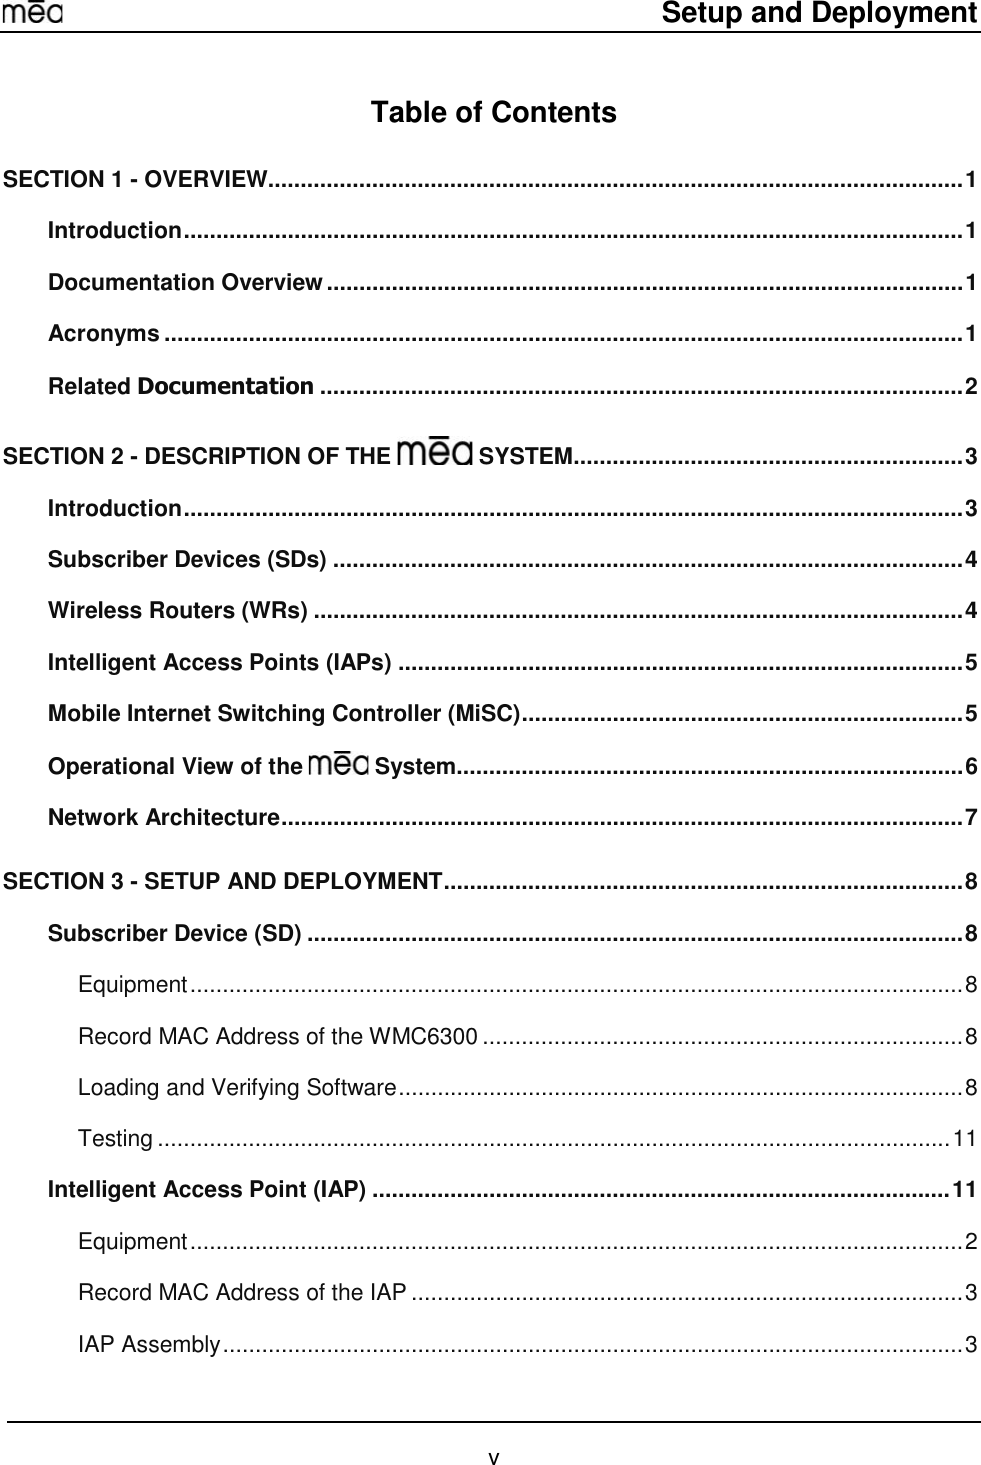     Setup and Deployment  v Table of Contents SECTION 1 - OVERVIEW...........................................................................................................1 Introduction........................................................................................................................1 Documentation Overview..................................................................................................1 Acronyms ...........................................................................................................................1 Related Documentation ...................................................................................................2 SECTION 2 - DESCRIPTION OF THE   SYSTEM............................................................3 Introduction........................................................................................................................3 Subscriber Devices (SDs) .................................................................................................4 Wireless Routers (WRs) ....................................................................................................4 Intelligent Access Points (IAPs) .......................................................................................5 Mobile Internet Switching Controller (MiSC)....................................................................5 Operational View of the   System..............................................................................6 Network Architecture.........................................................................................................7 SECTION 3 - SETUP AND DEPLOYMENT................................................................................8 Subscriber Device (SD) .....................................................................................................8 Equipment.......................................................................................................................8 Record MAC Address of the WMC6300 ..........................................................................8 Loading and Verifying Software.......................................................................................8 Testing ..........................................................................................................................11 Intelligent Access Point (IAP) .........................................................................................11 Equipment.......................................................................................................................2 Record MAC Address of the IAP .....................................................................................3 IAP Assembly..................................................................................................................3 